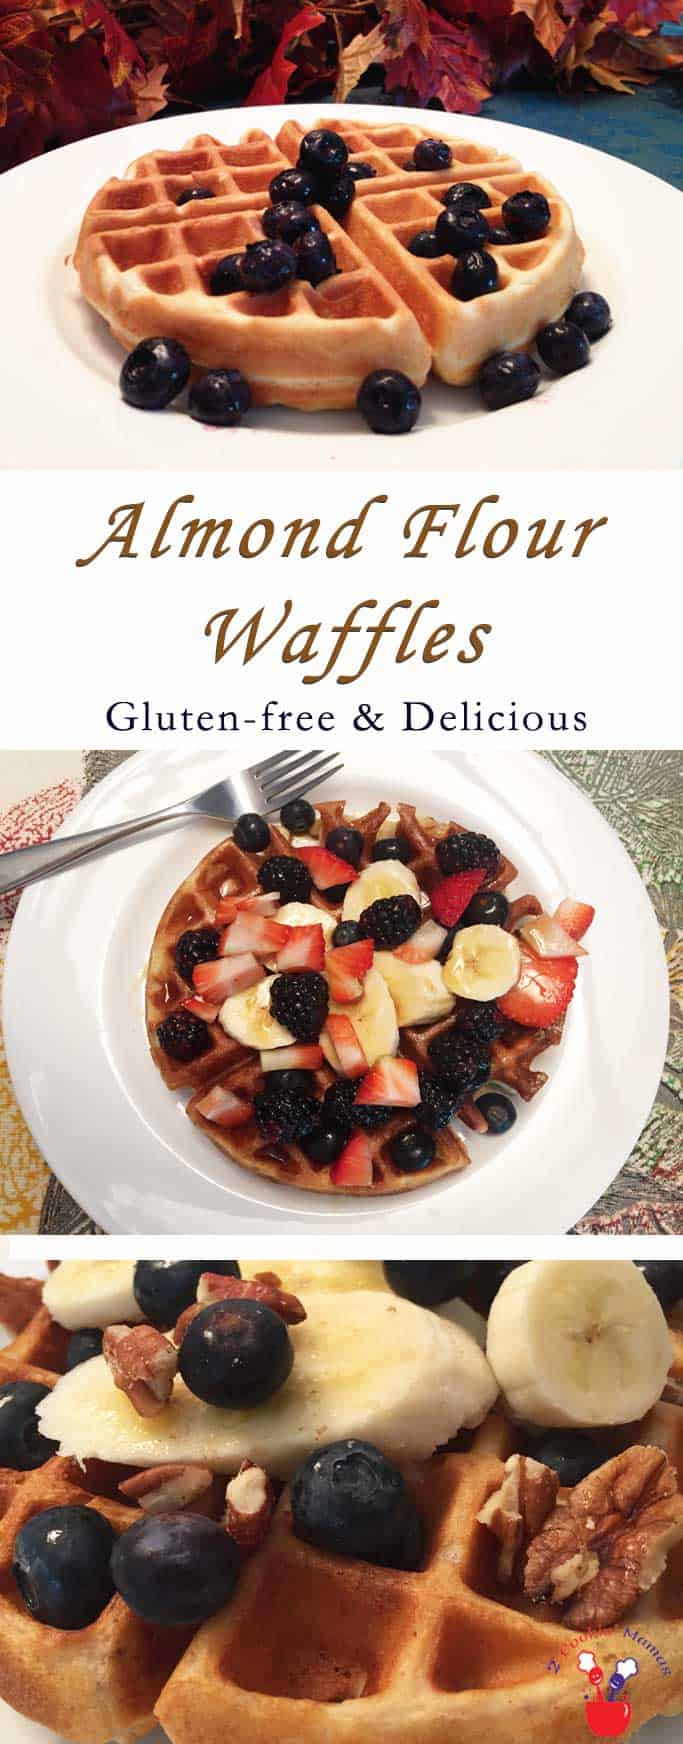 Almond Flour Waffles main | 2 Cookin Mamas Our Almond Flour Waffles are perfect for both gluten-free & paleo diets. Made with almond flour, eggs & sweetened with honey, it's one tasty breakfast. #recipe